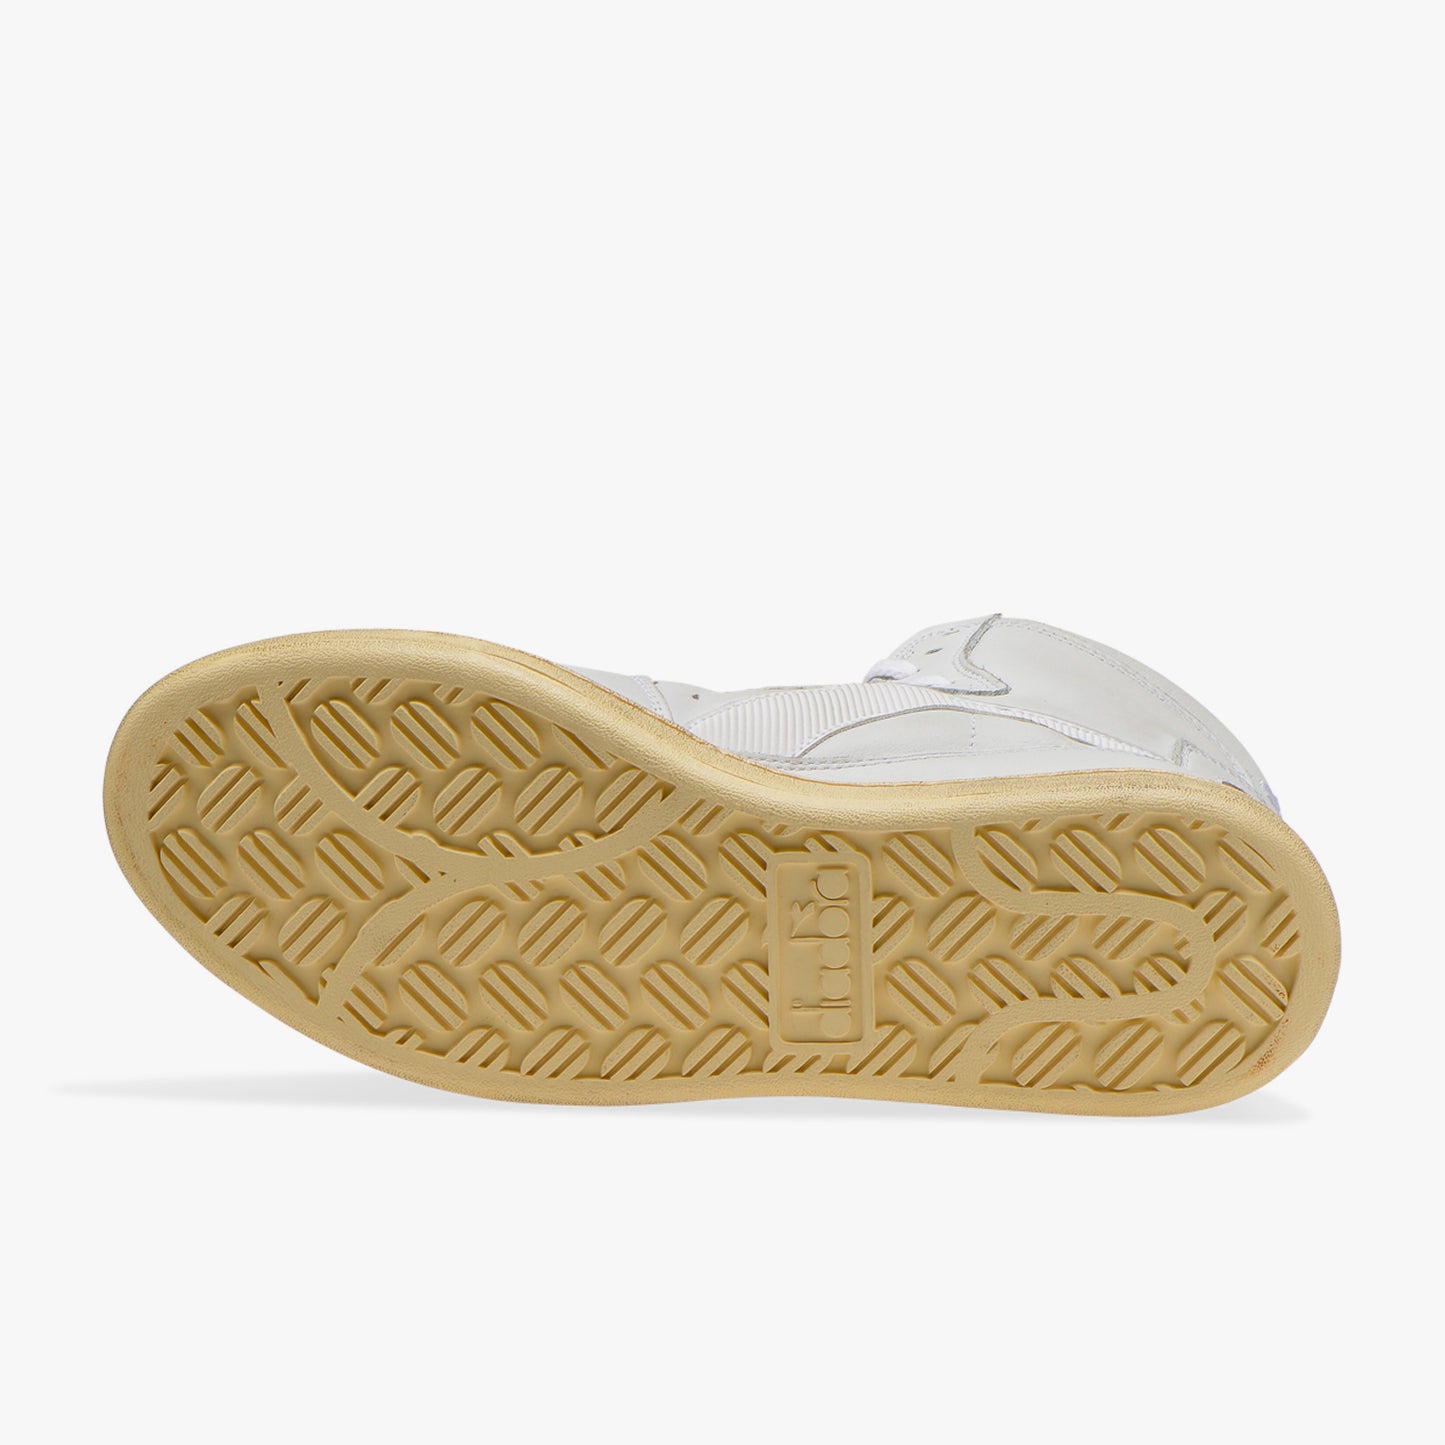 view from bottom of sole of diadora white mi basket used shoe with white stripe and beige sole